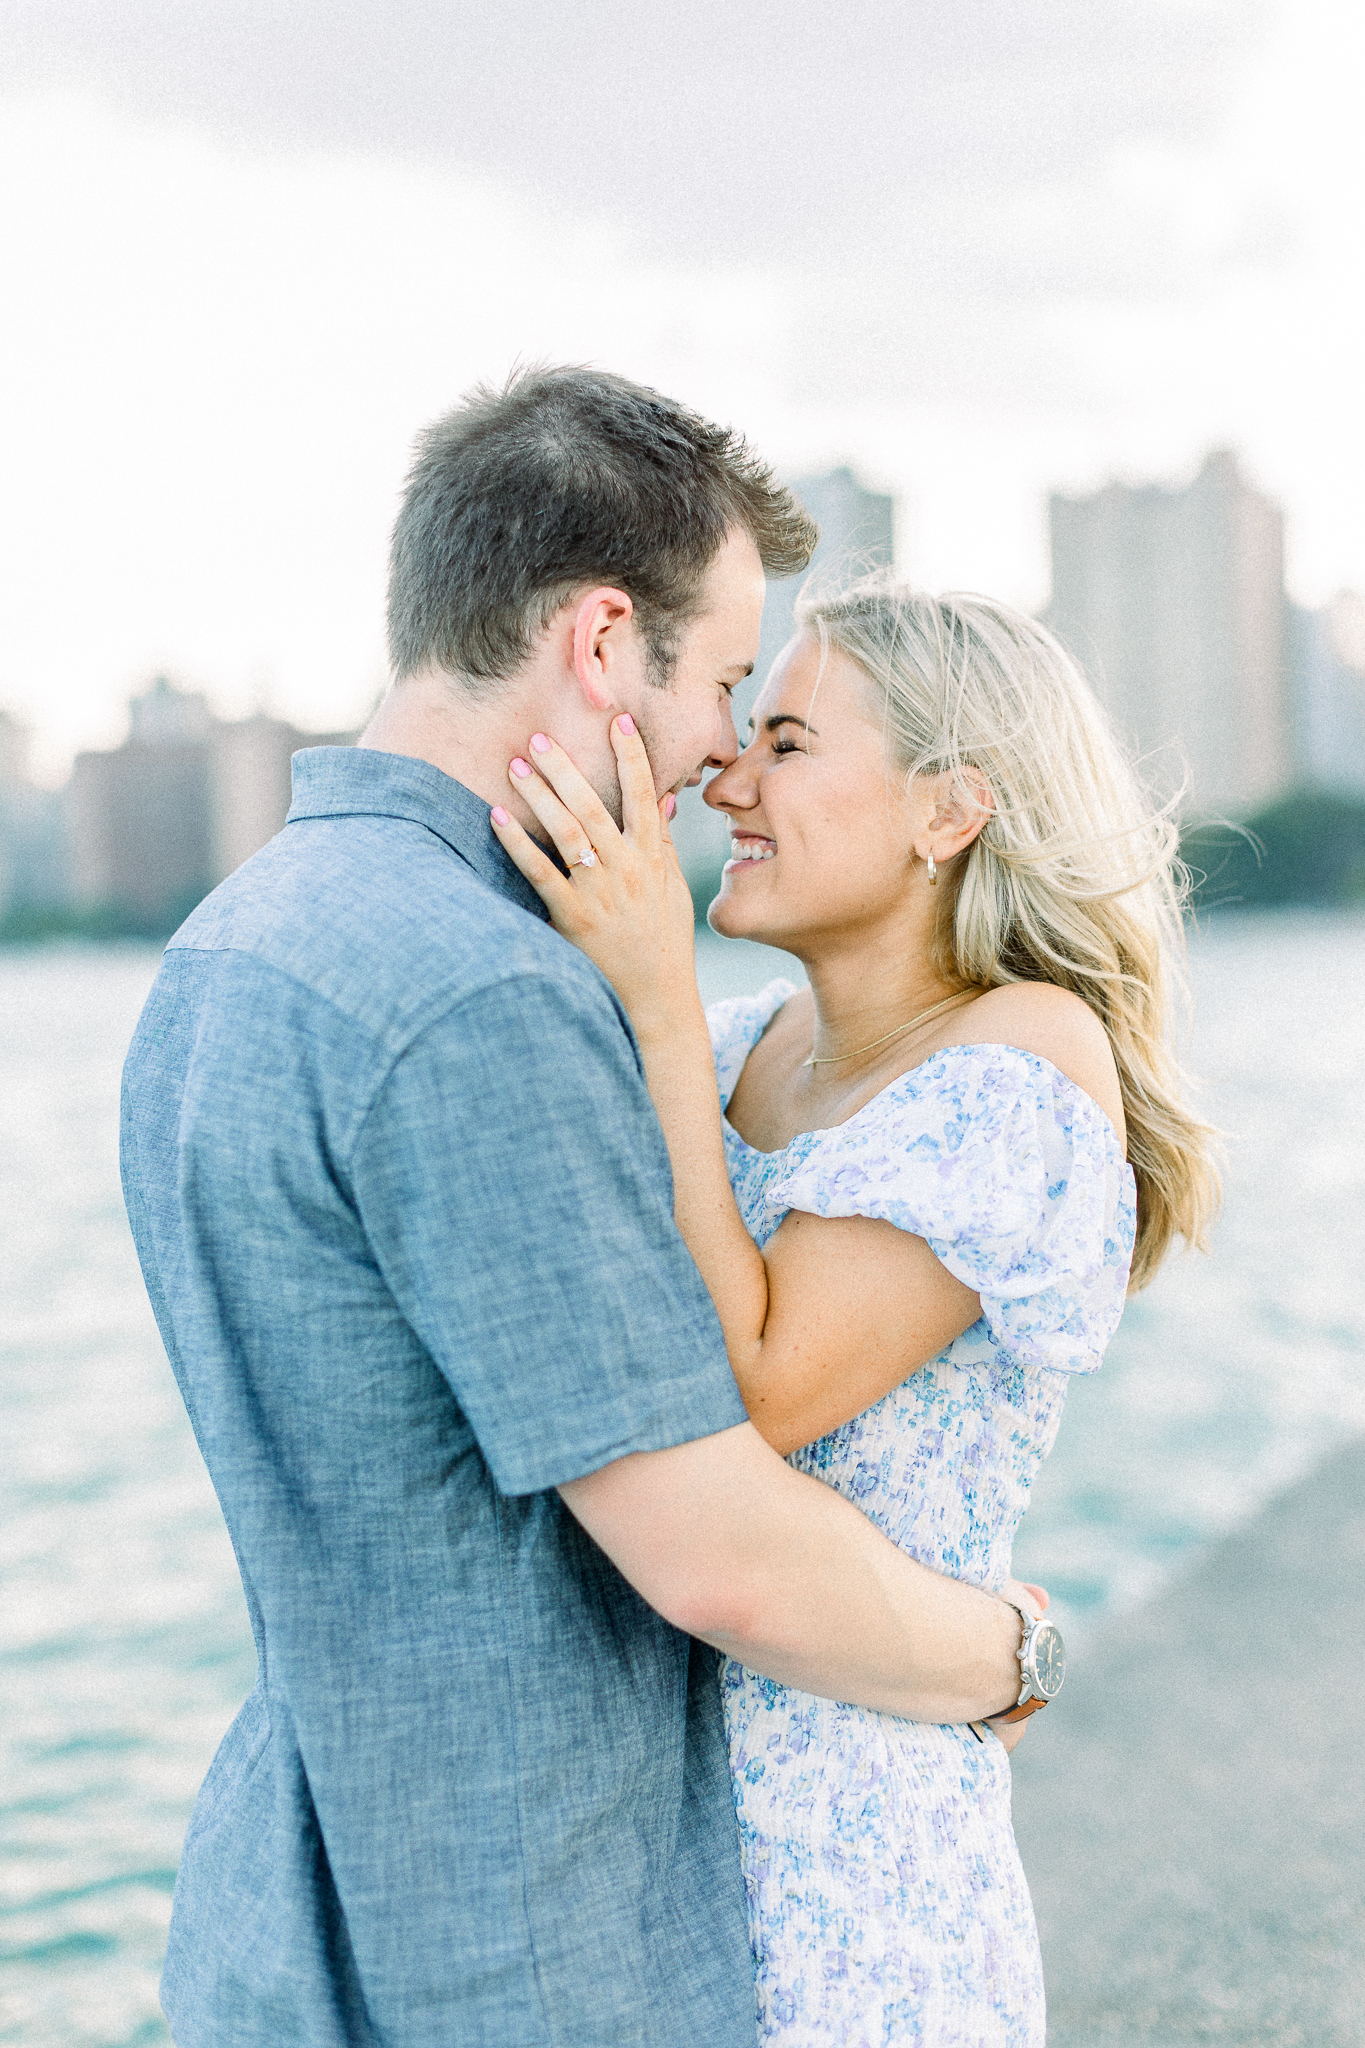 hayley-moore-photography-lauren-tony-downtown-chicago-engagement-photographer-cover